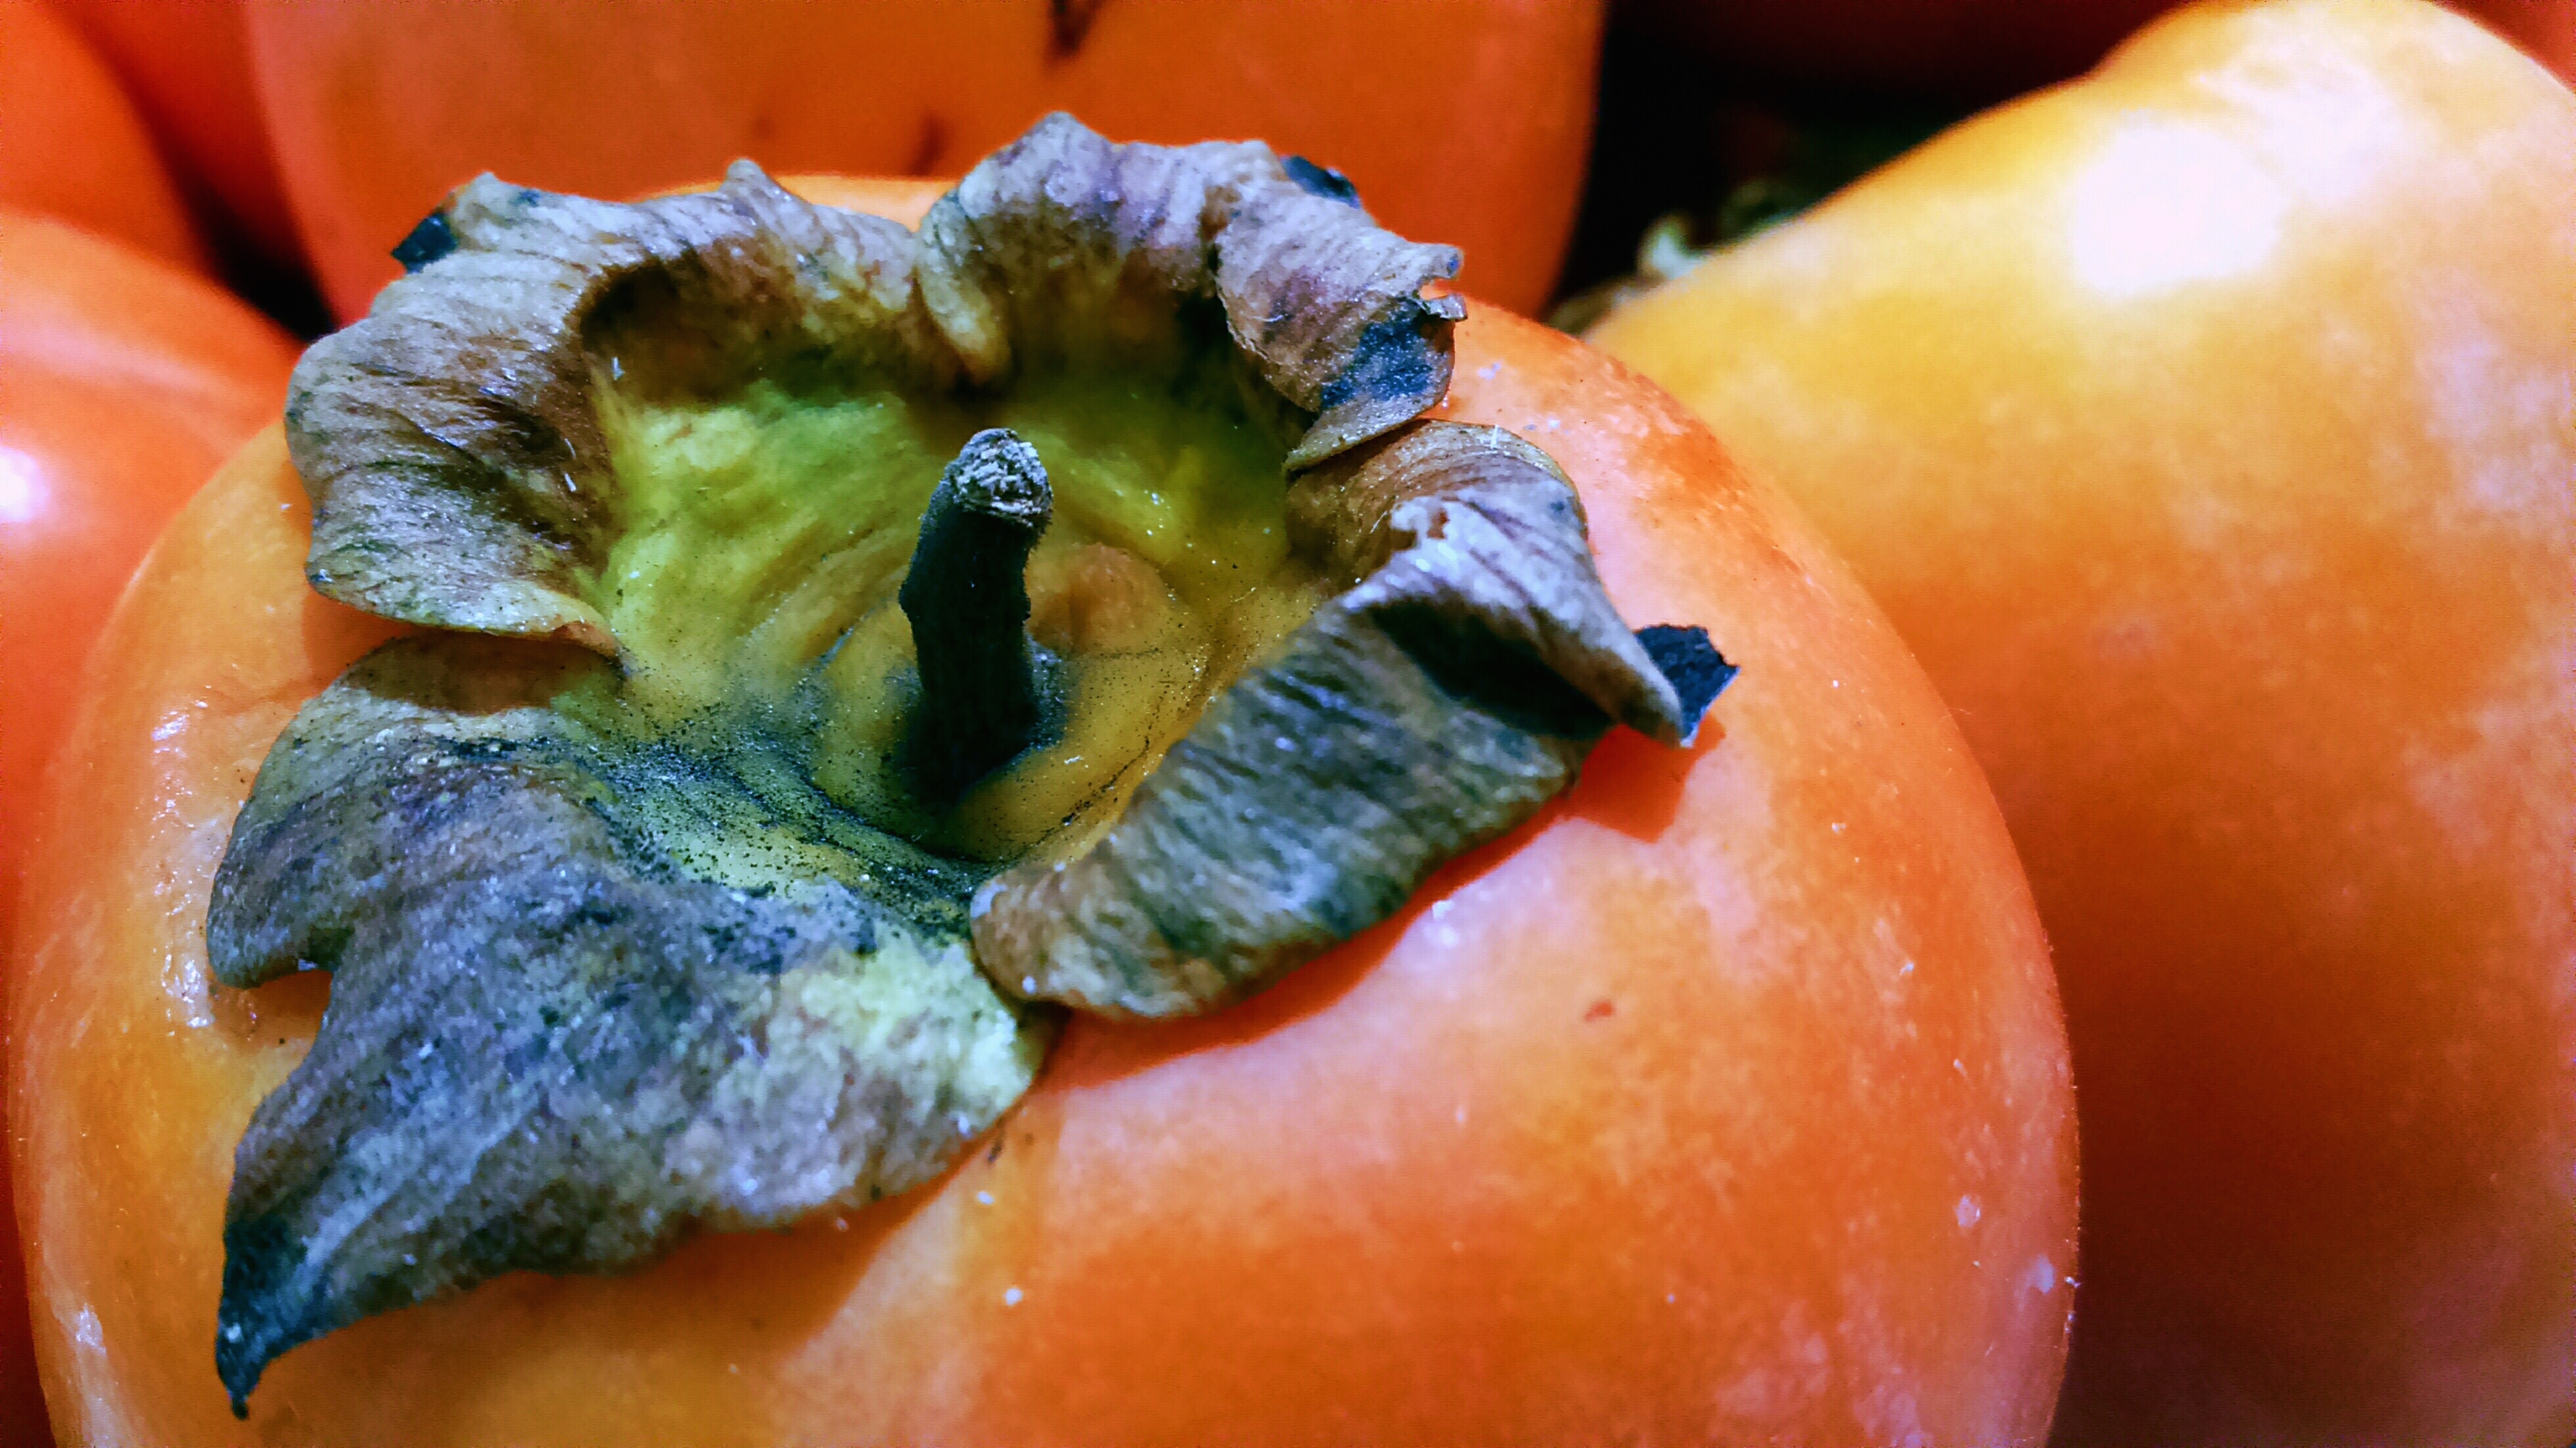 You can really only eat persimmons in the fall.  Sliced in a salad is pretty amazing,  Romano says.